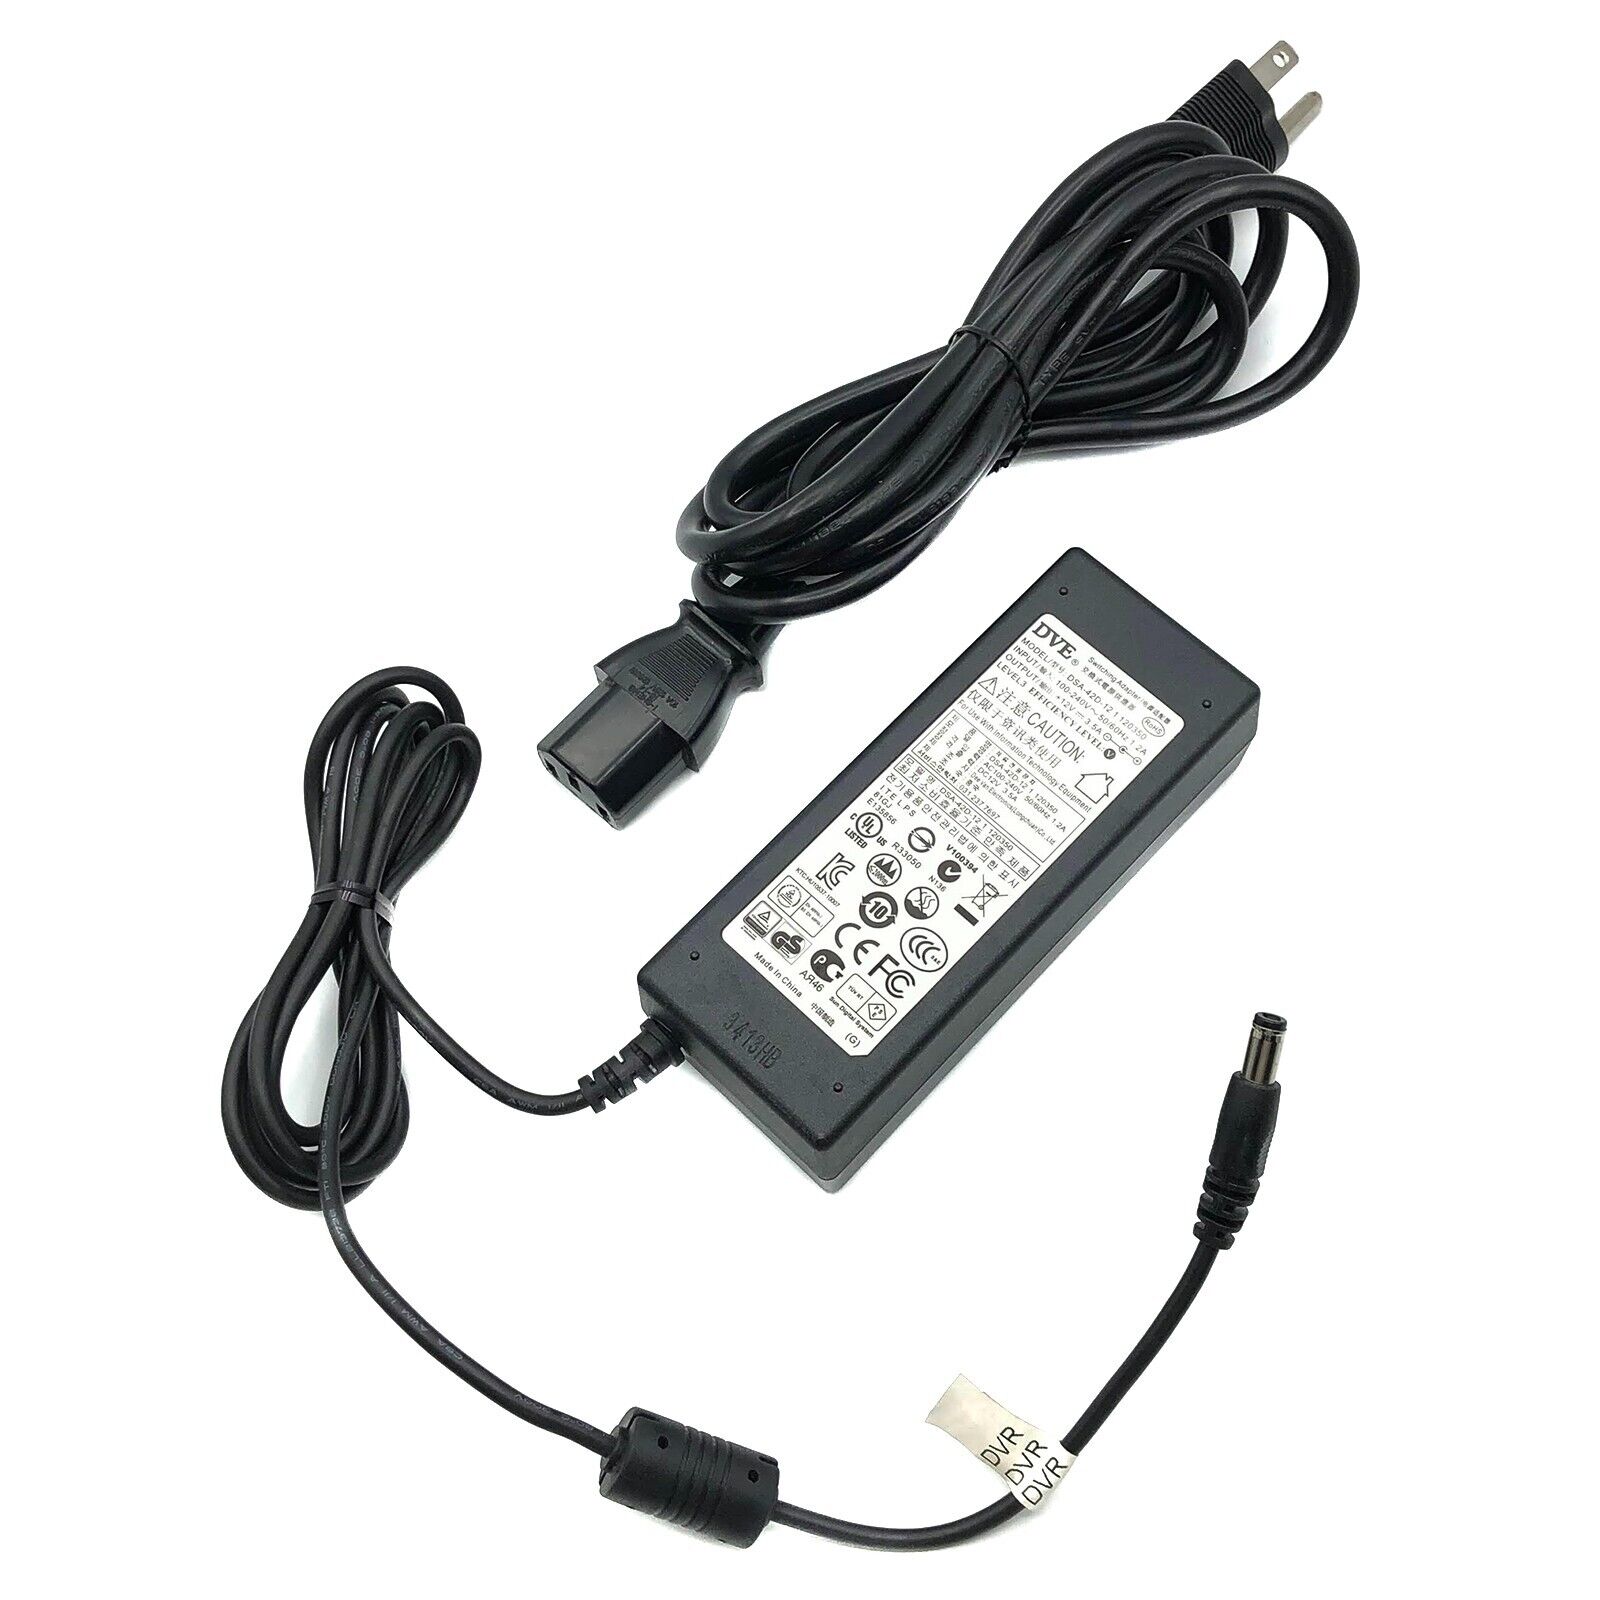 *Brand NEW*Genuine DVE 12V 3.5A 39W AC Switching Adapter Model DSA-42D-12 1 120350 Power Supply